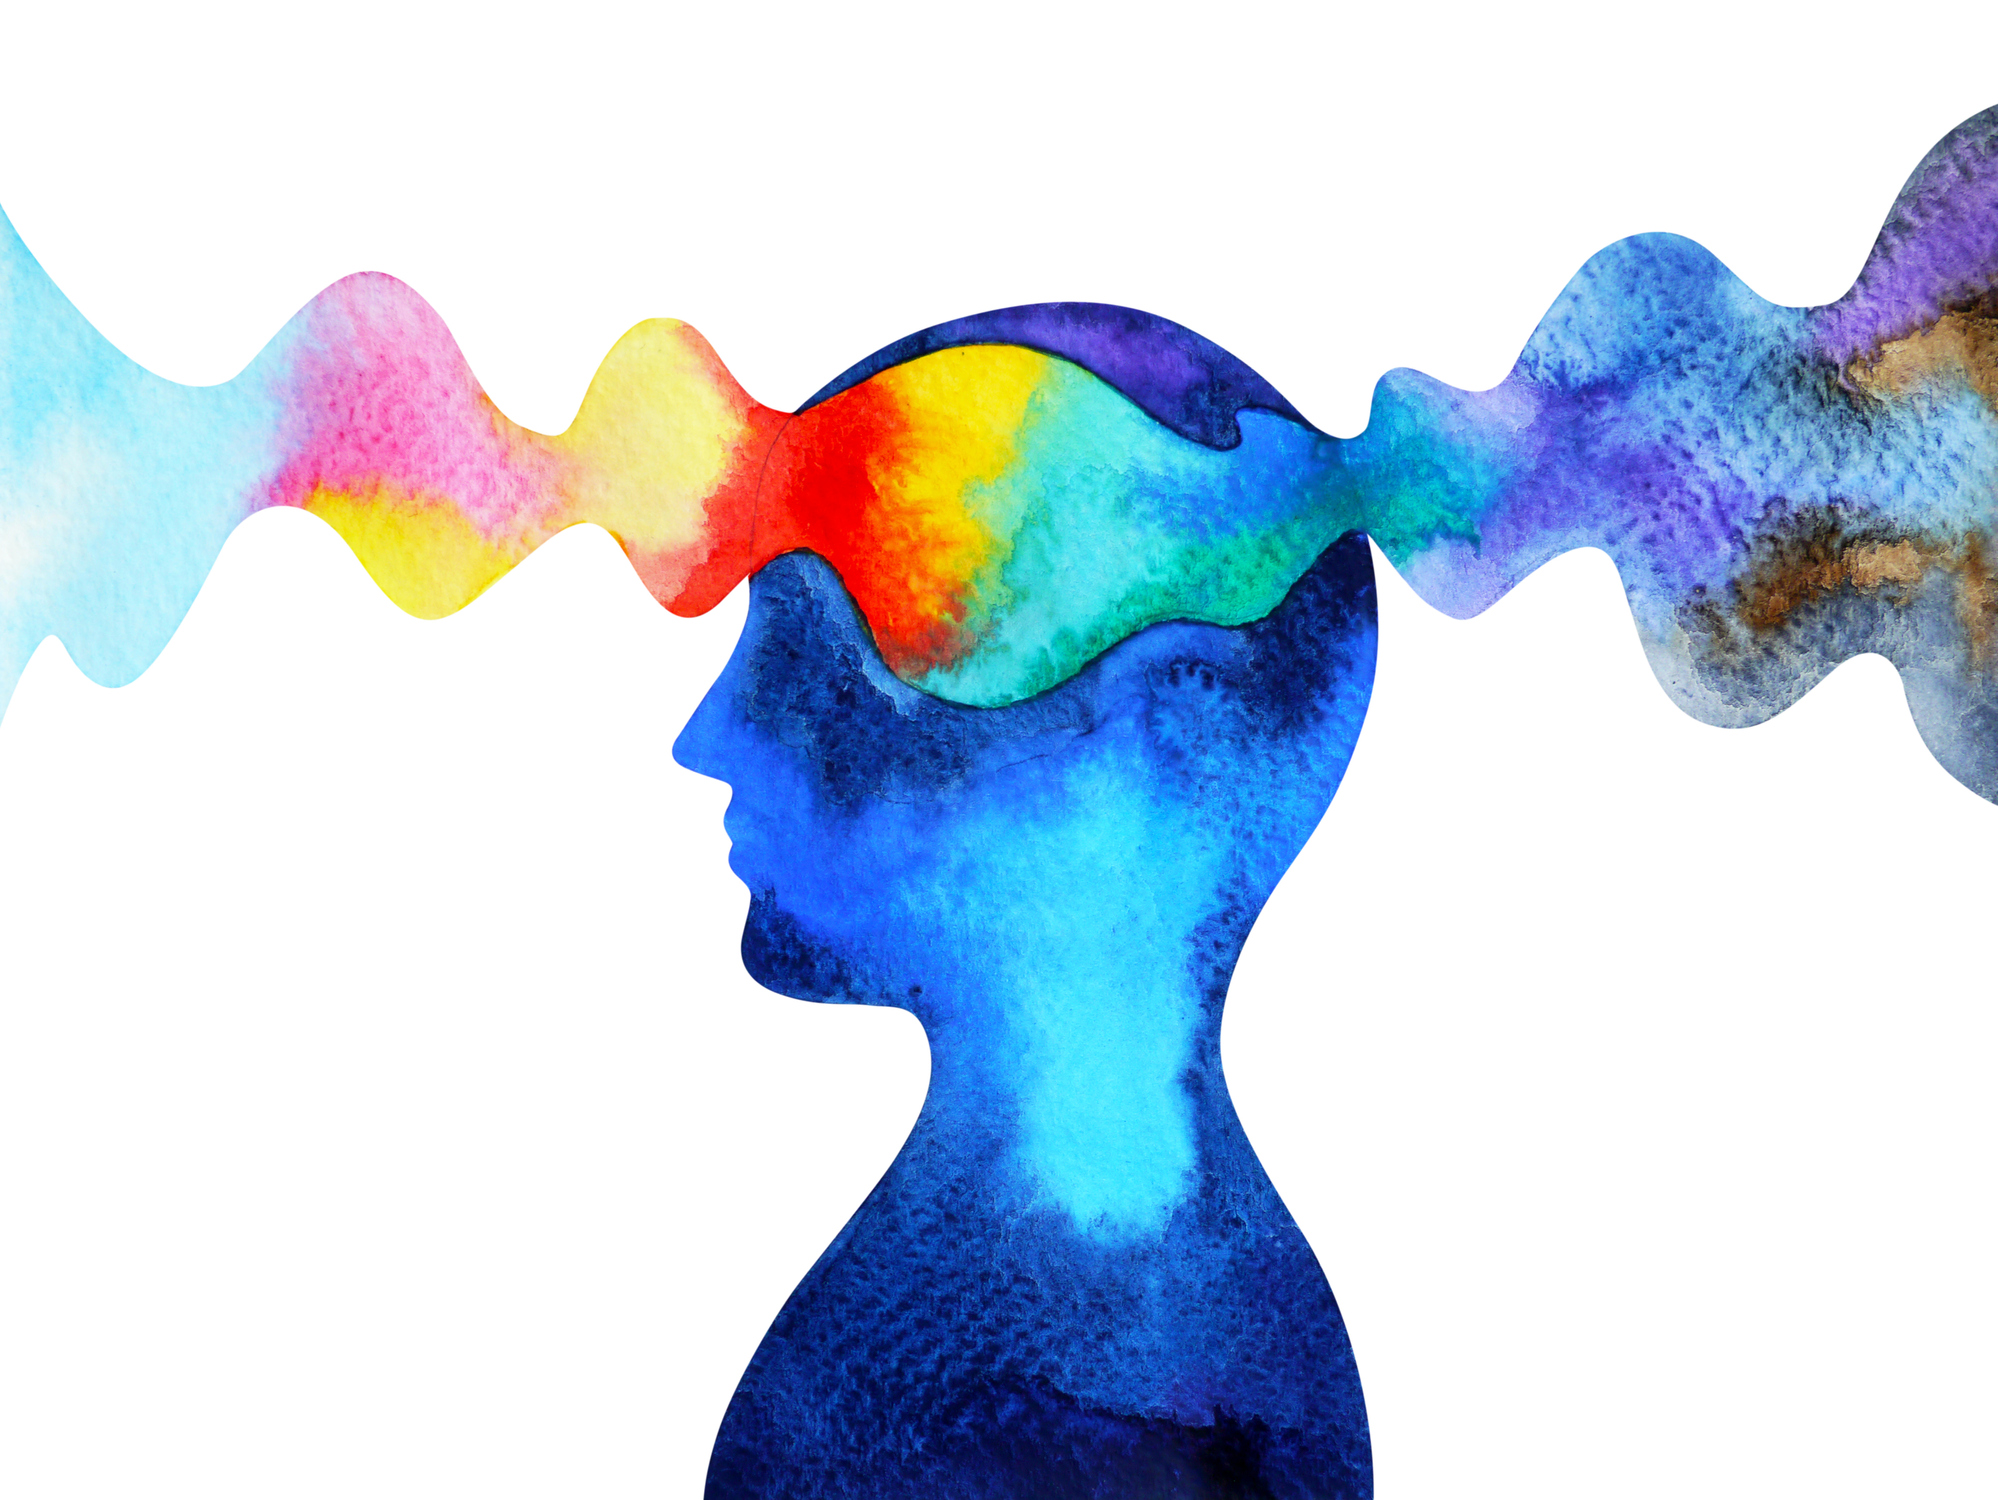  Illustration of a person with a glowing head in the shape of a brain, emitting waves of positive energy in a rainbow of colors.